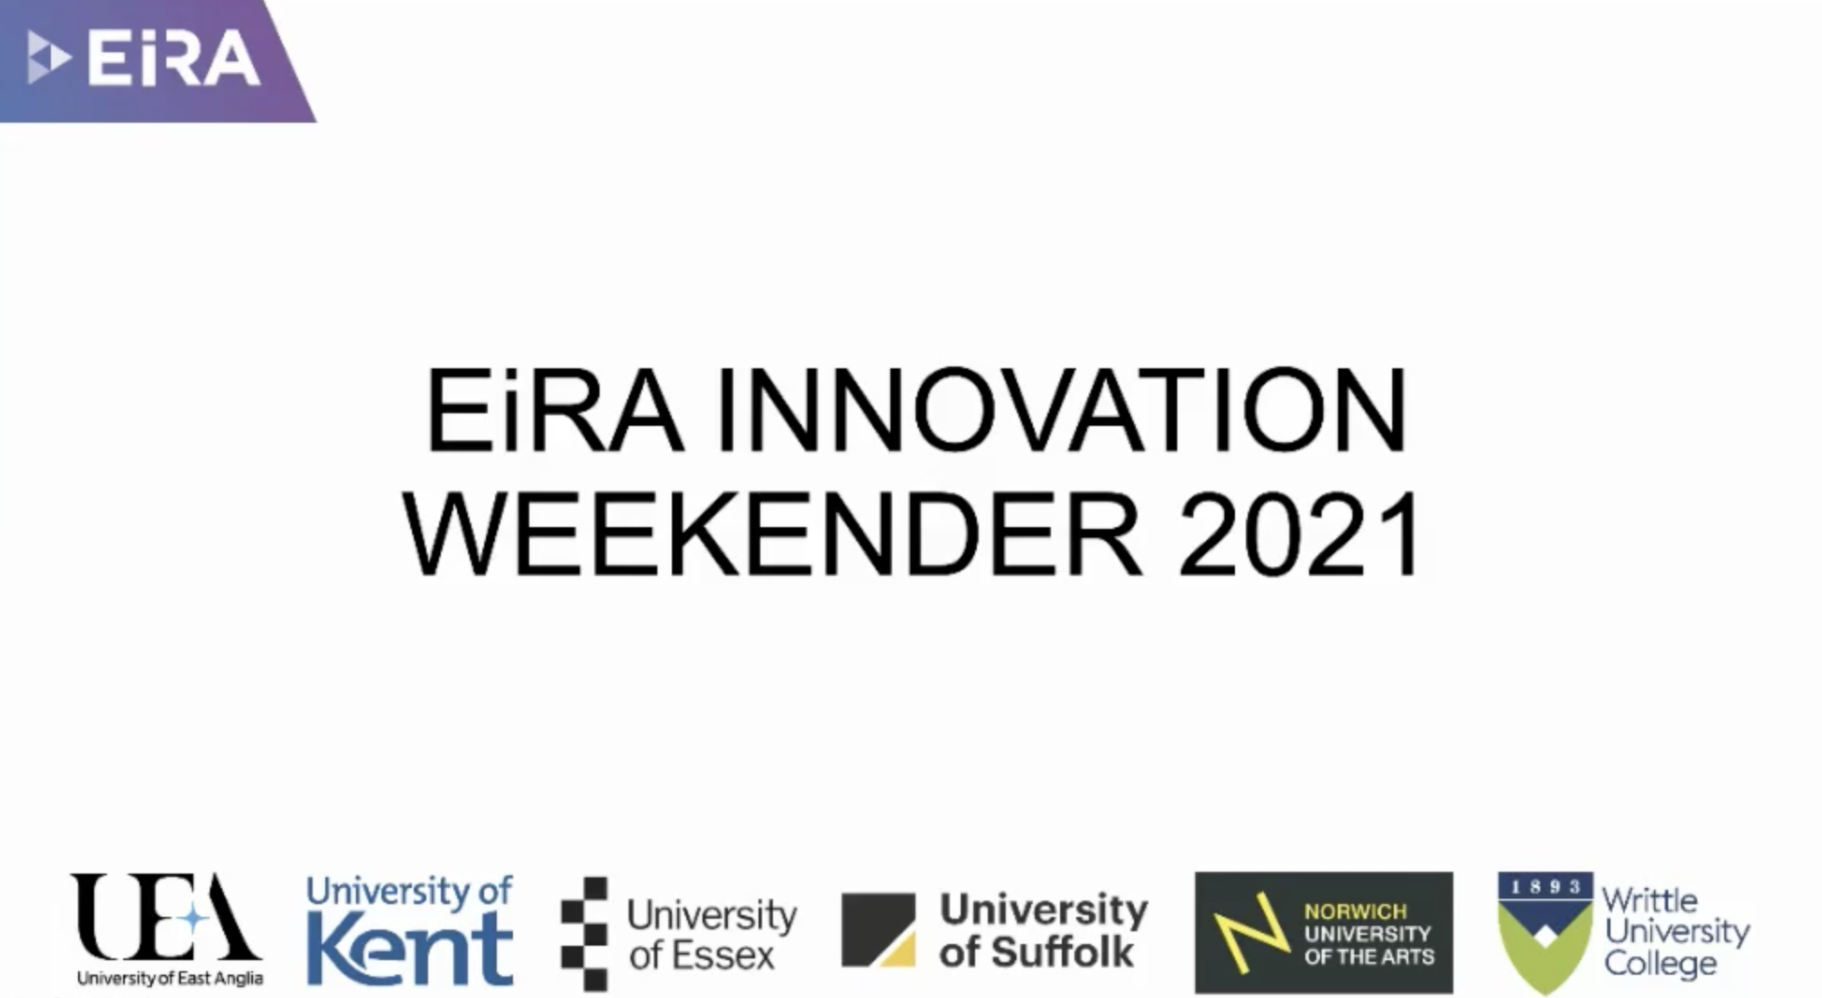 EIRA Innovation Weekender 2021 with participating logos